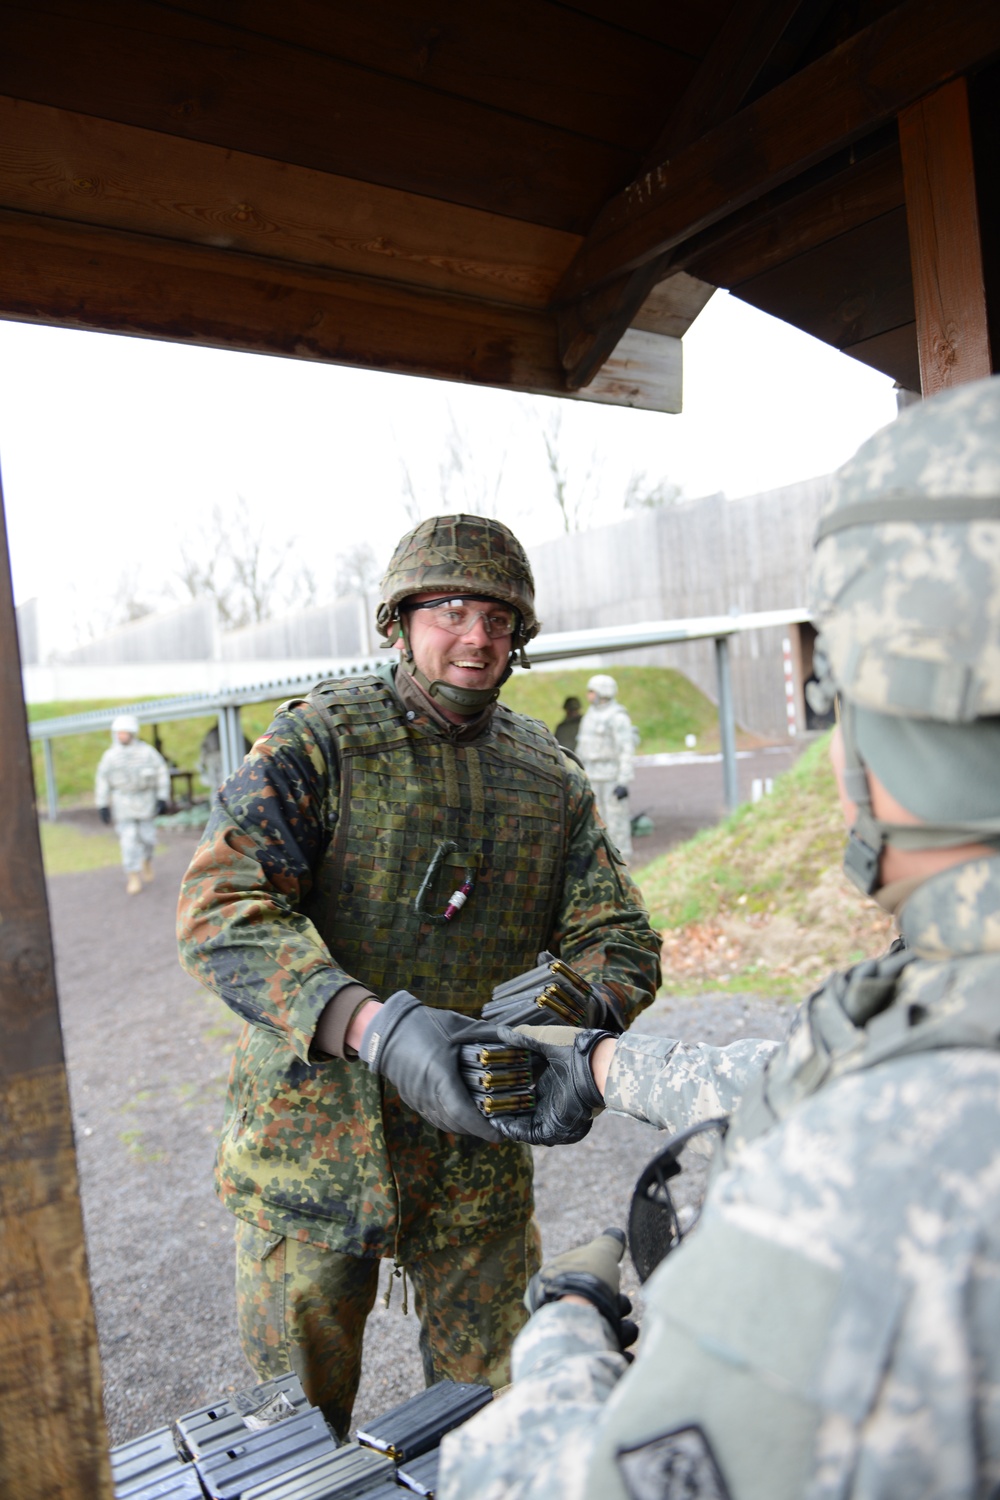 US and German soldiers qualifying